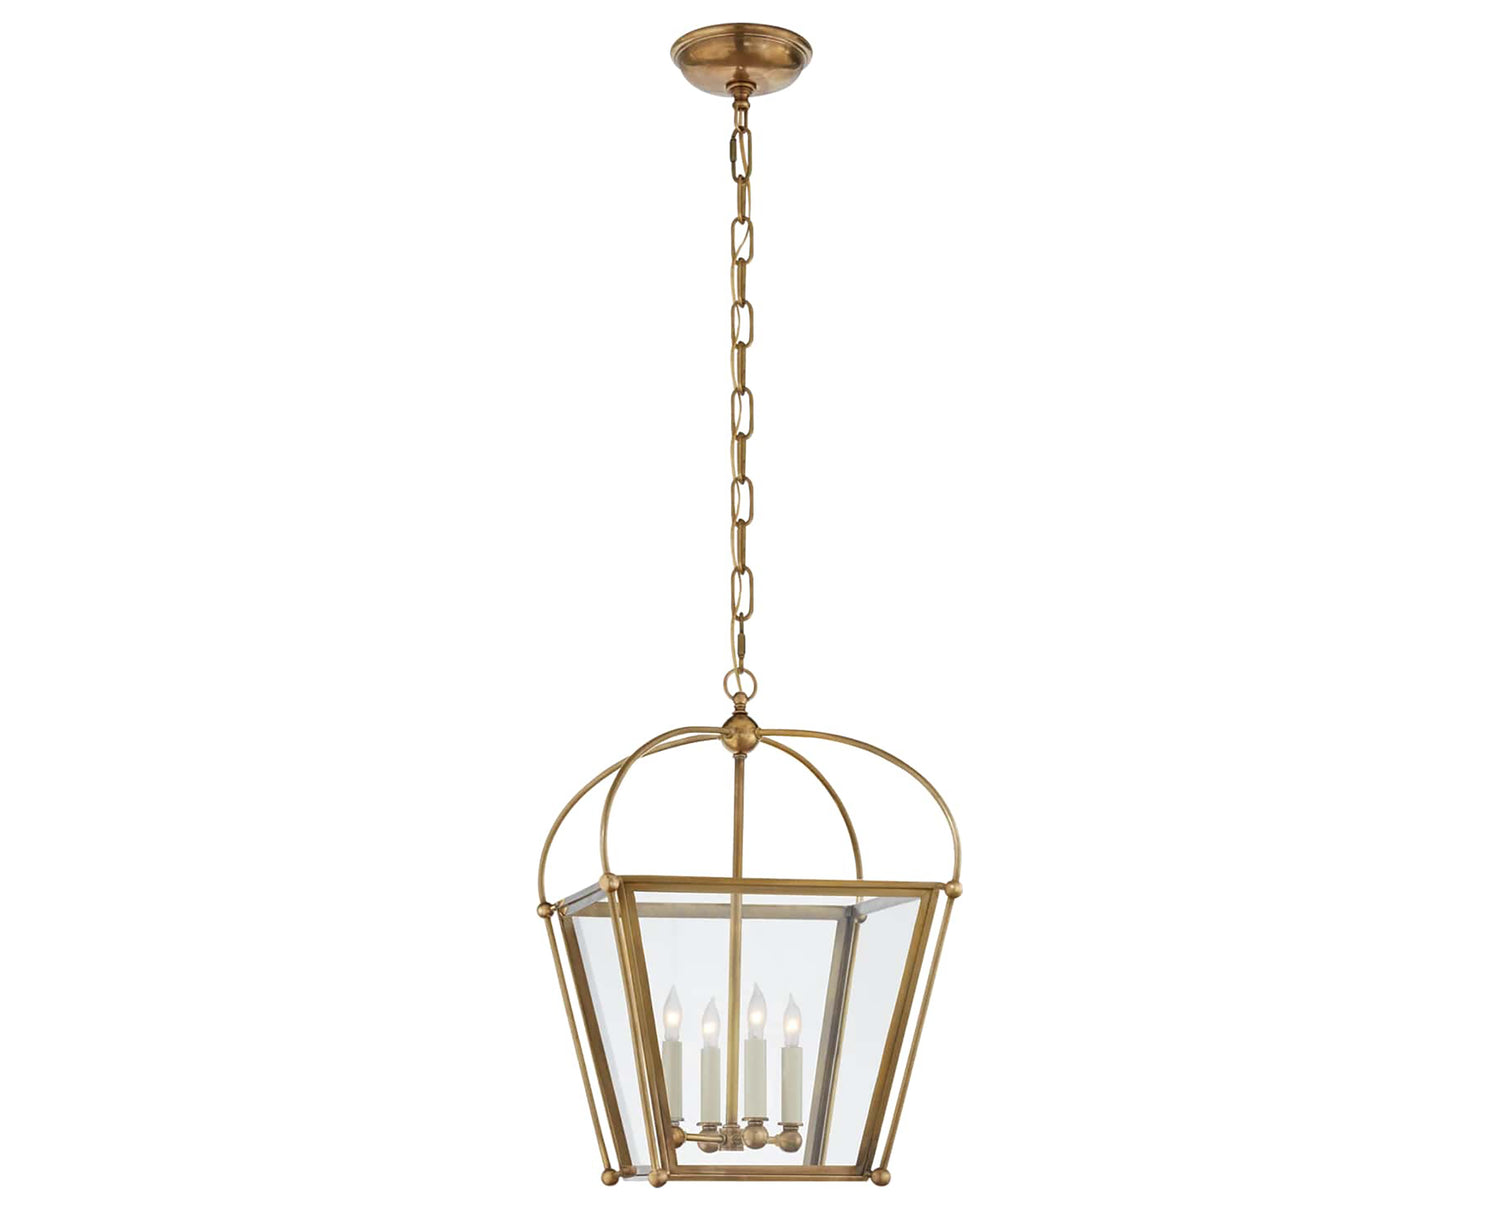 Antique-Burnished Brass & Clear Glass | Riverside Small Square Lantern | Valley Ridge Furniture